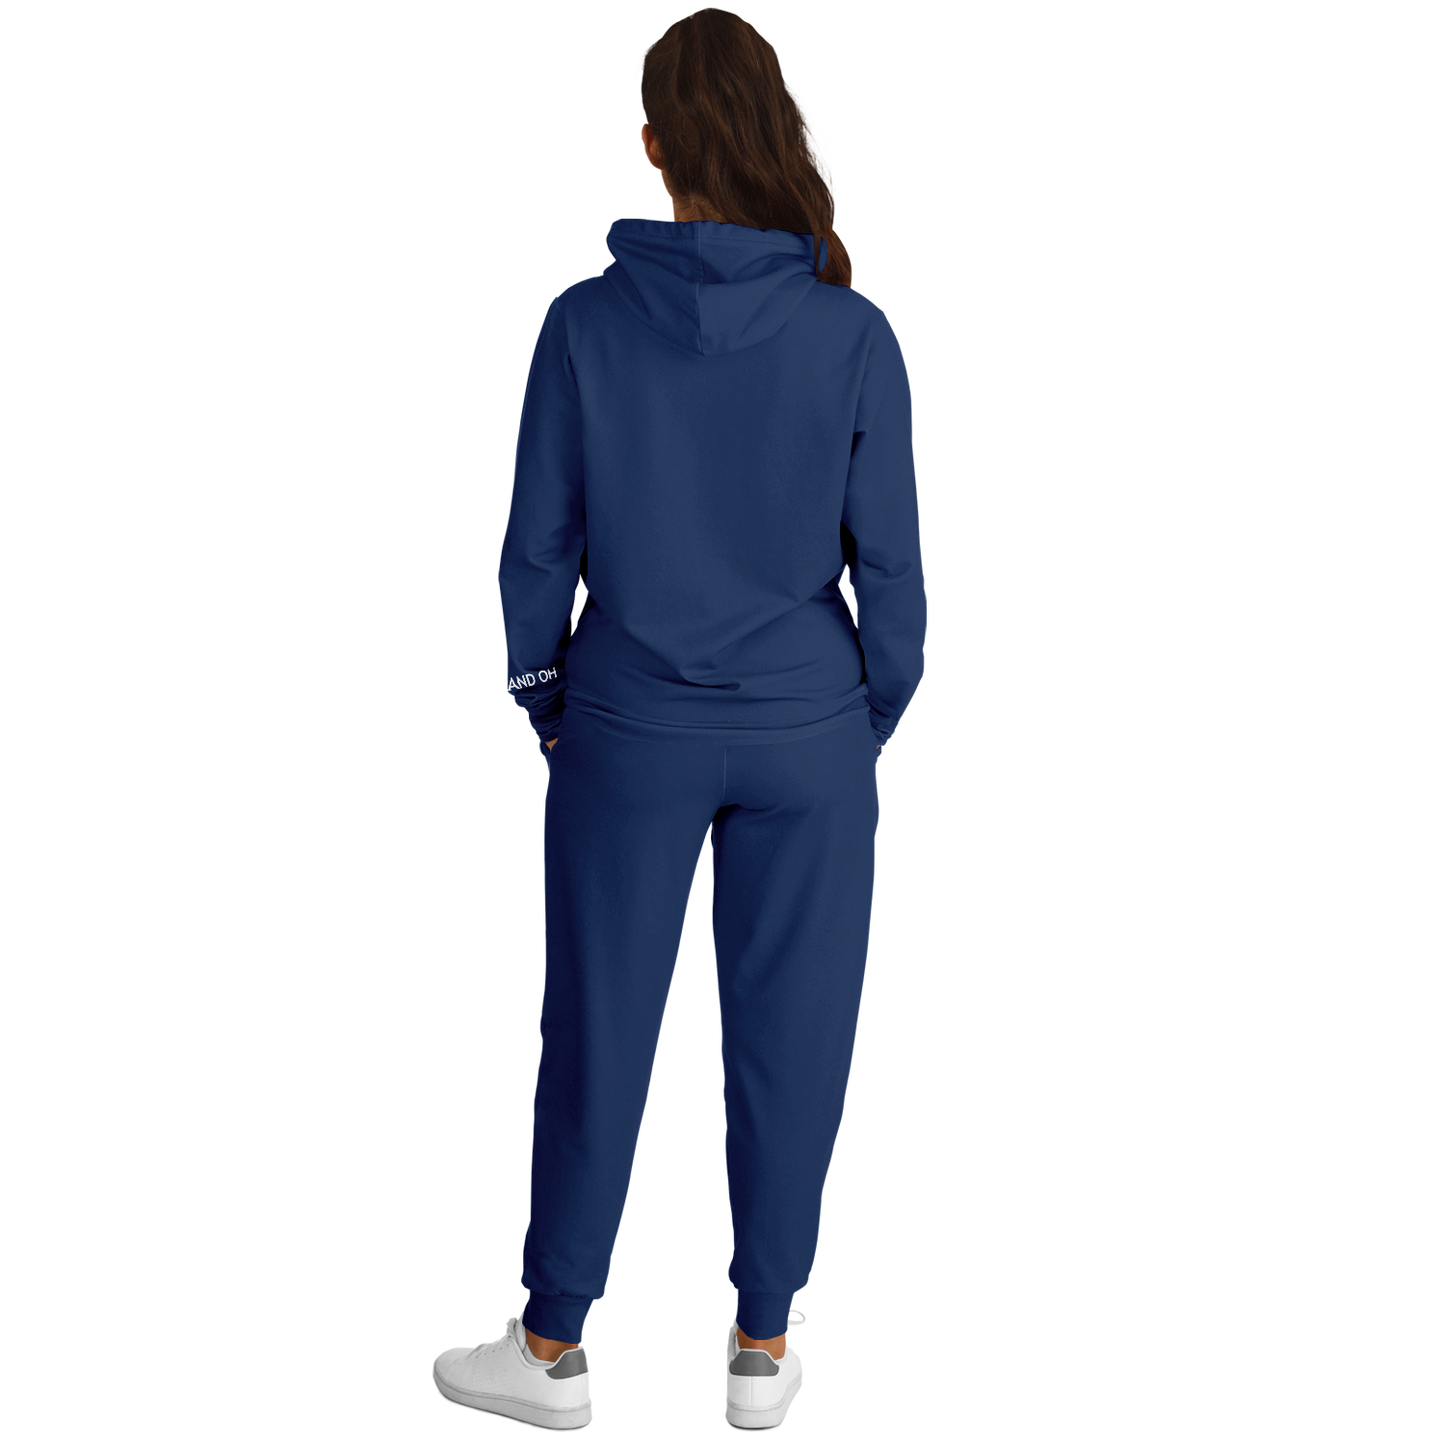 Cleveland Navy Blue Hoodie and Joggers POST